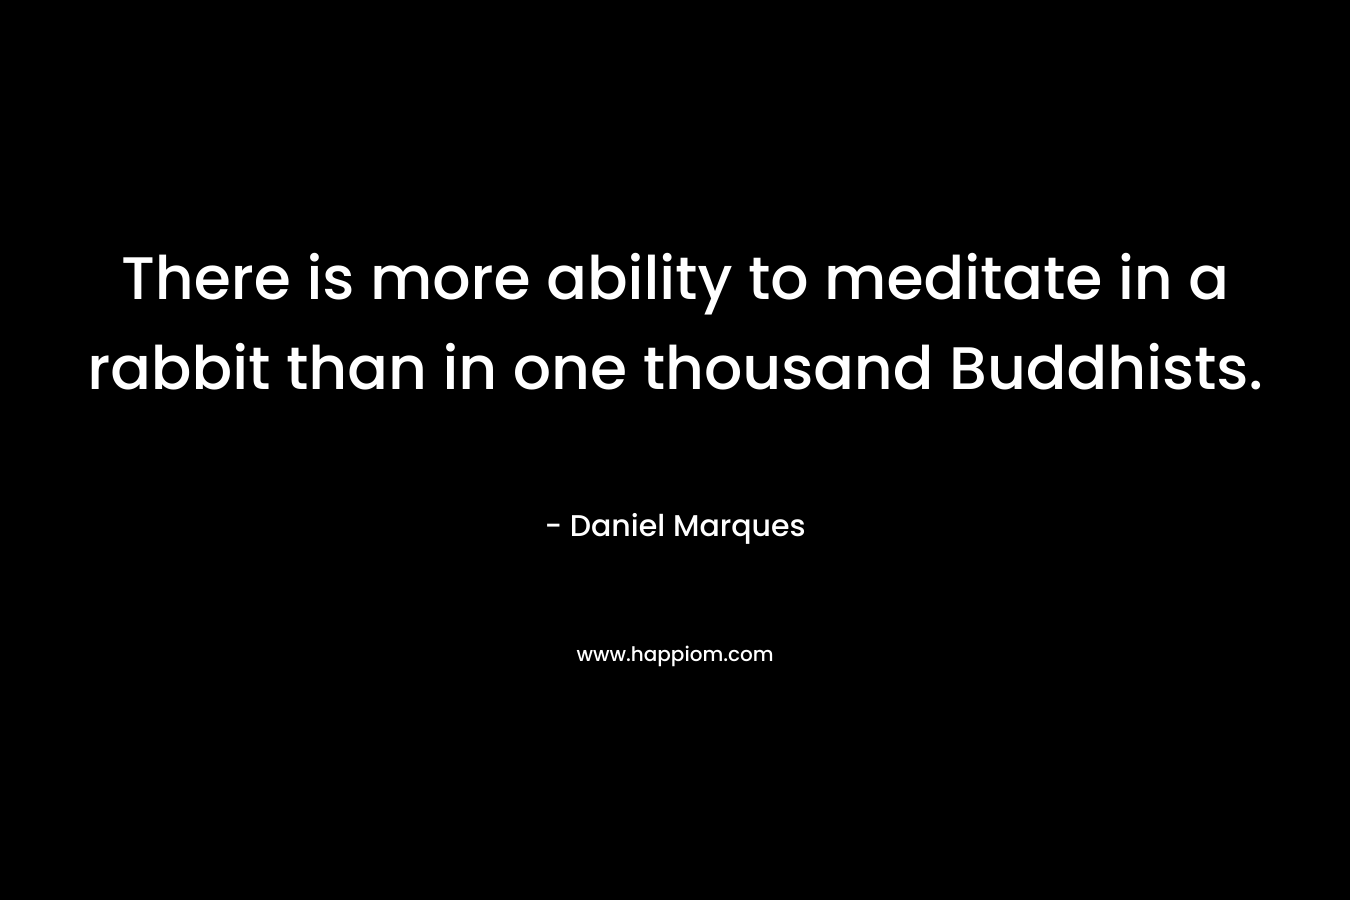 There is more ability to meditate in a rabbit than in one thousand Buddhists. – Daniel Marques